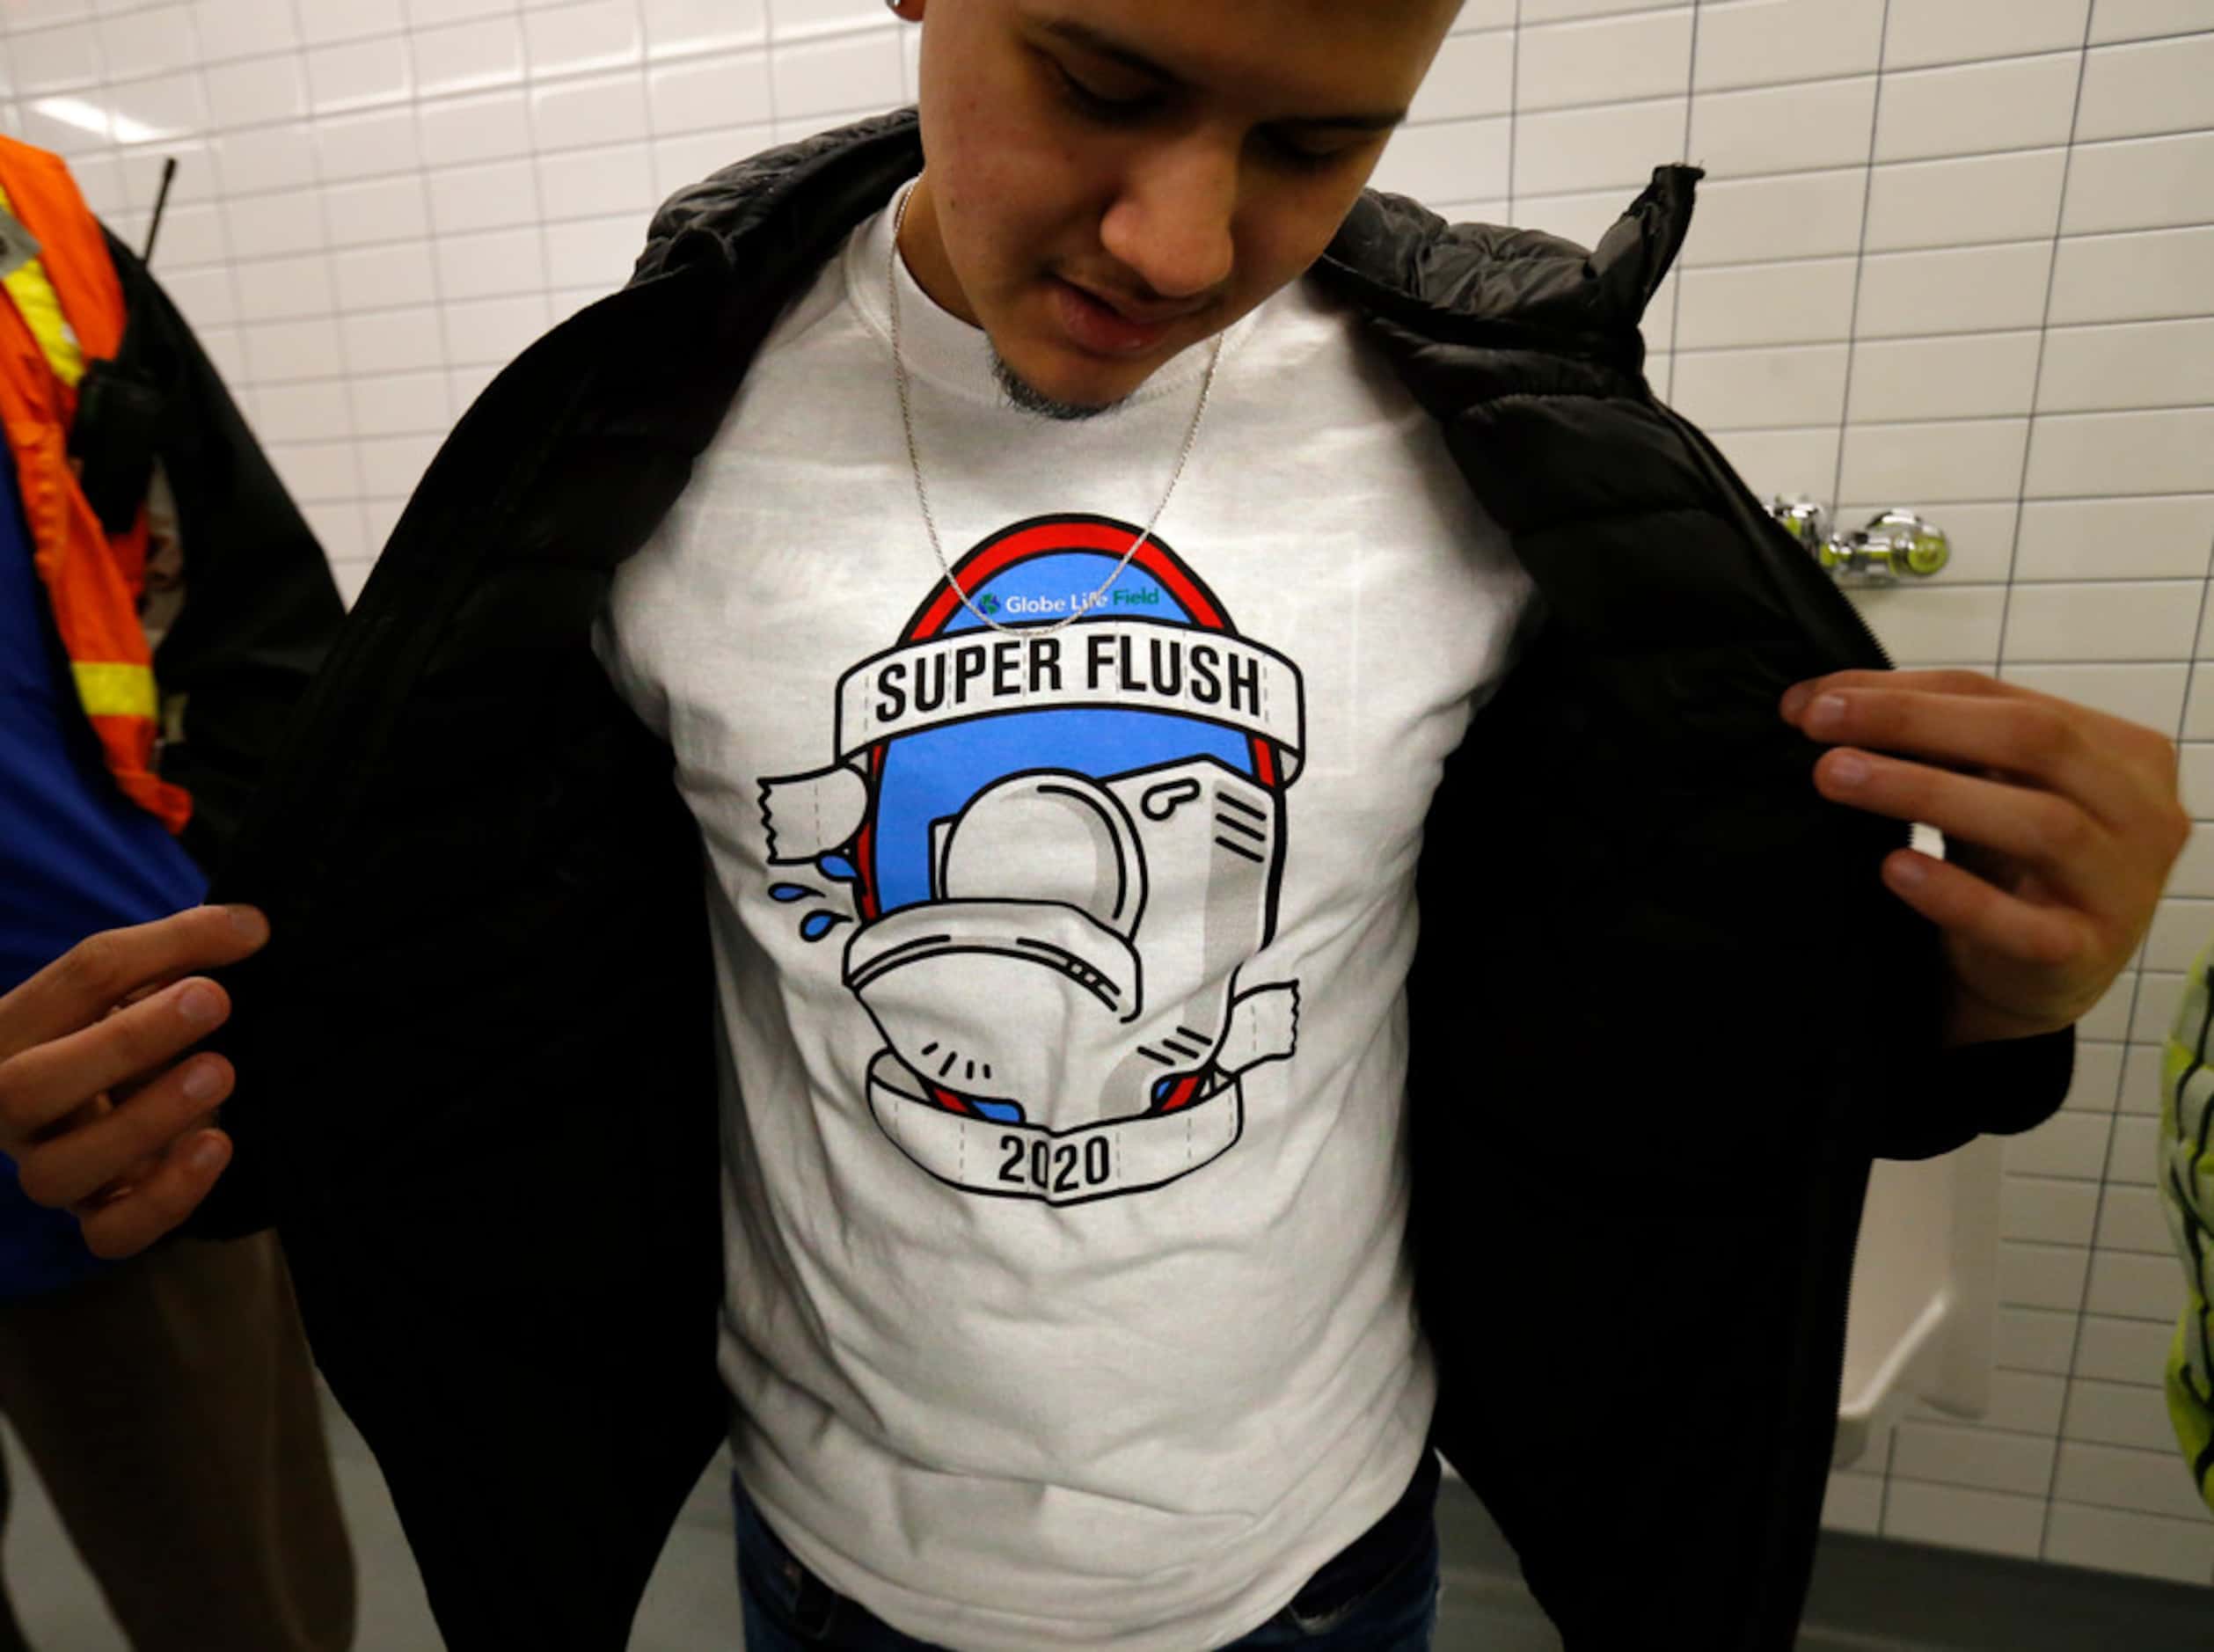 A high school student shows off his Super Flush t-shirt before a mass flushing of toilets...